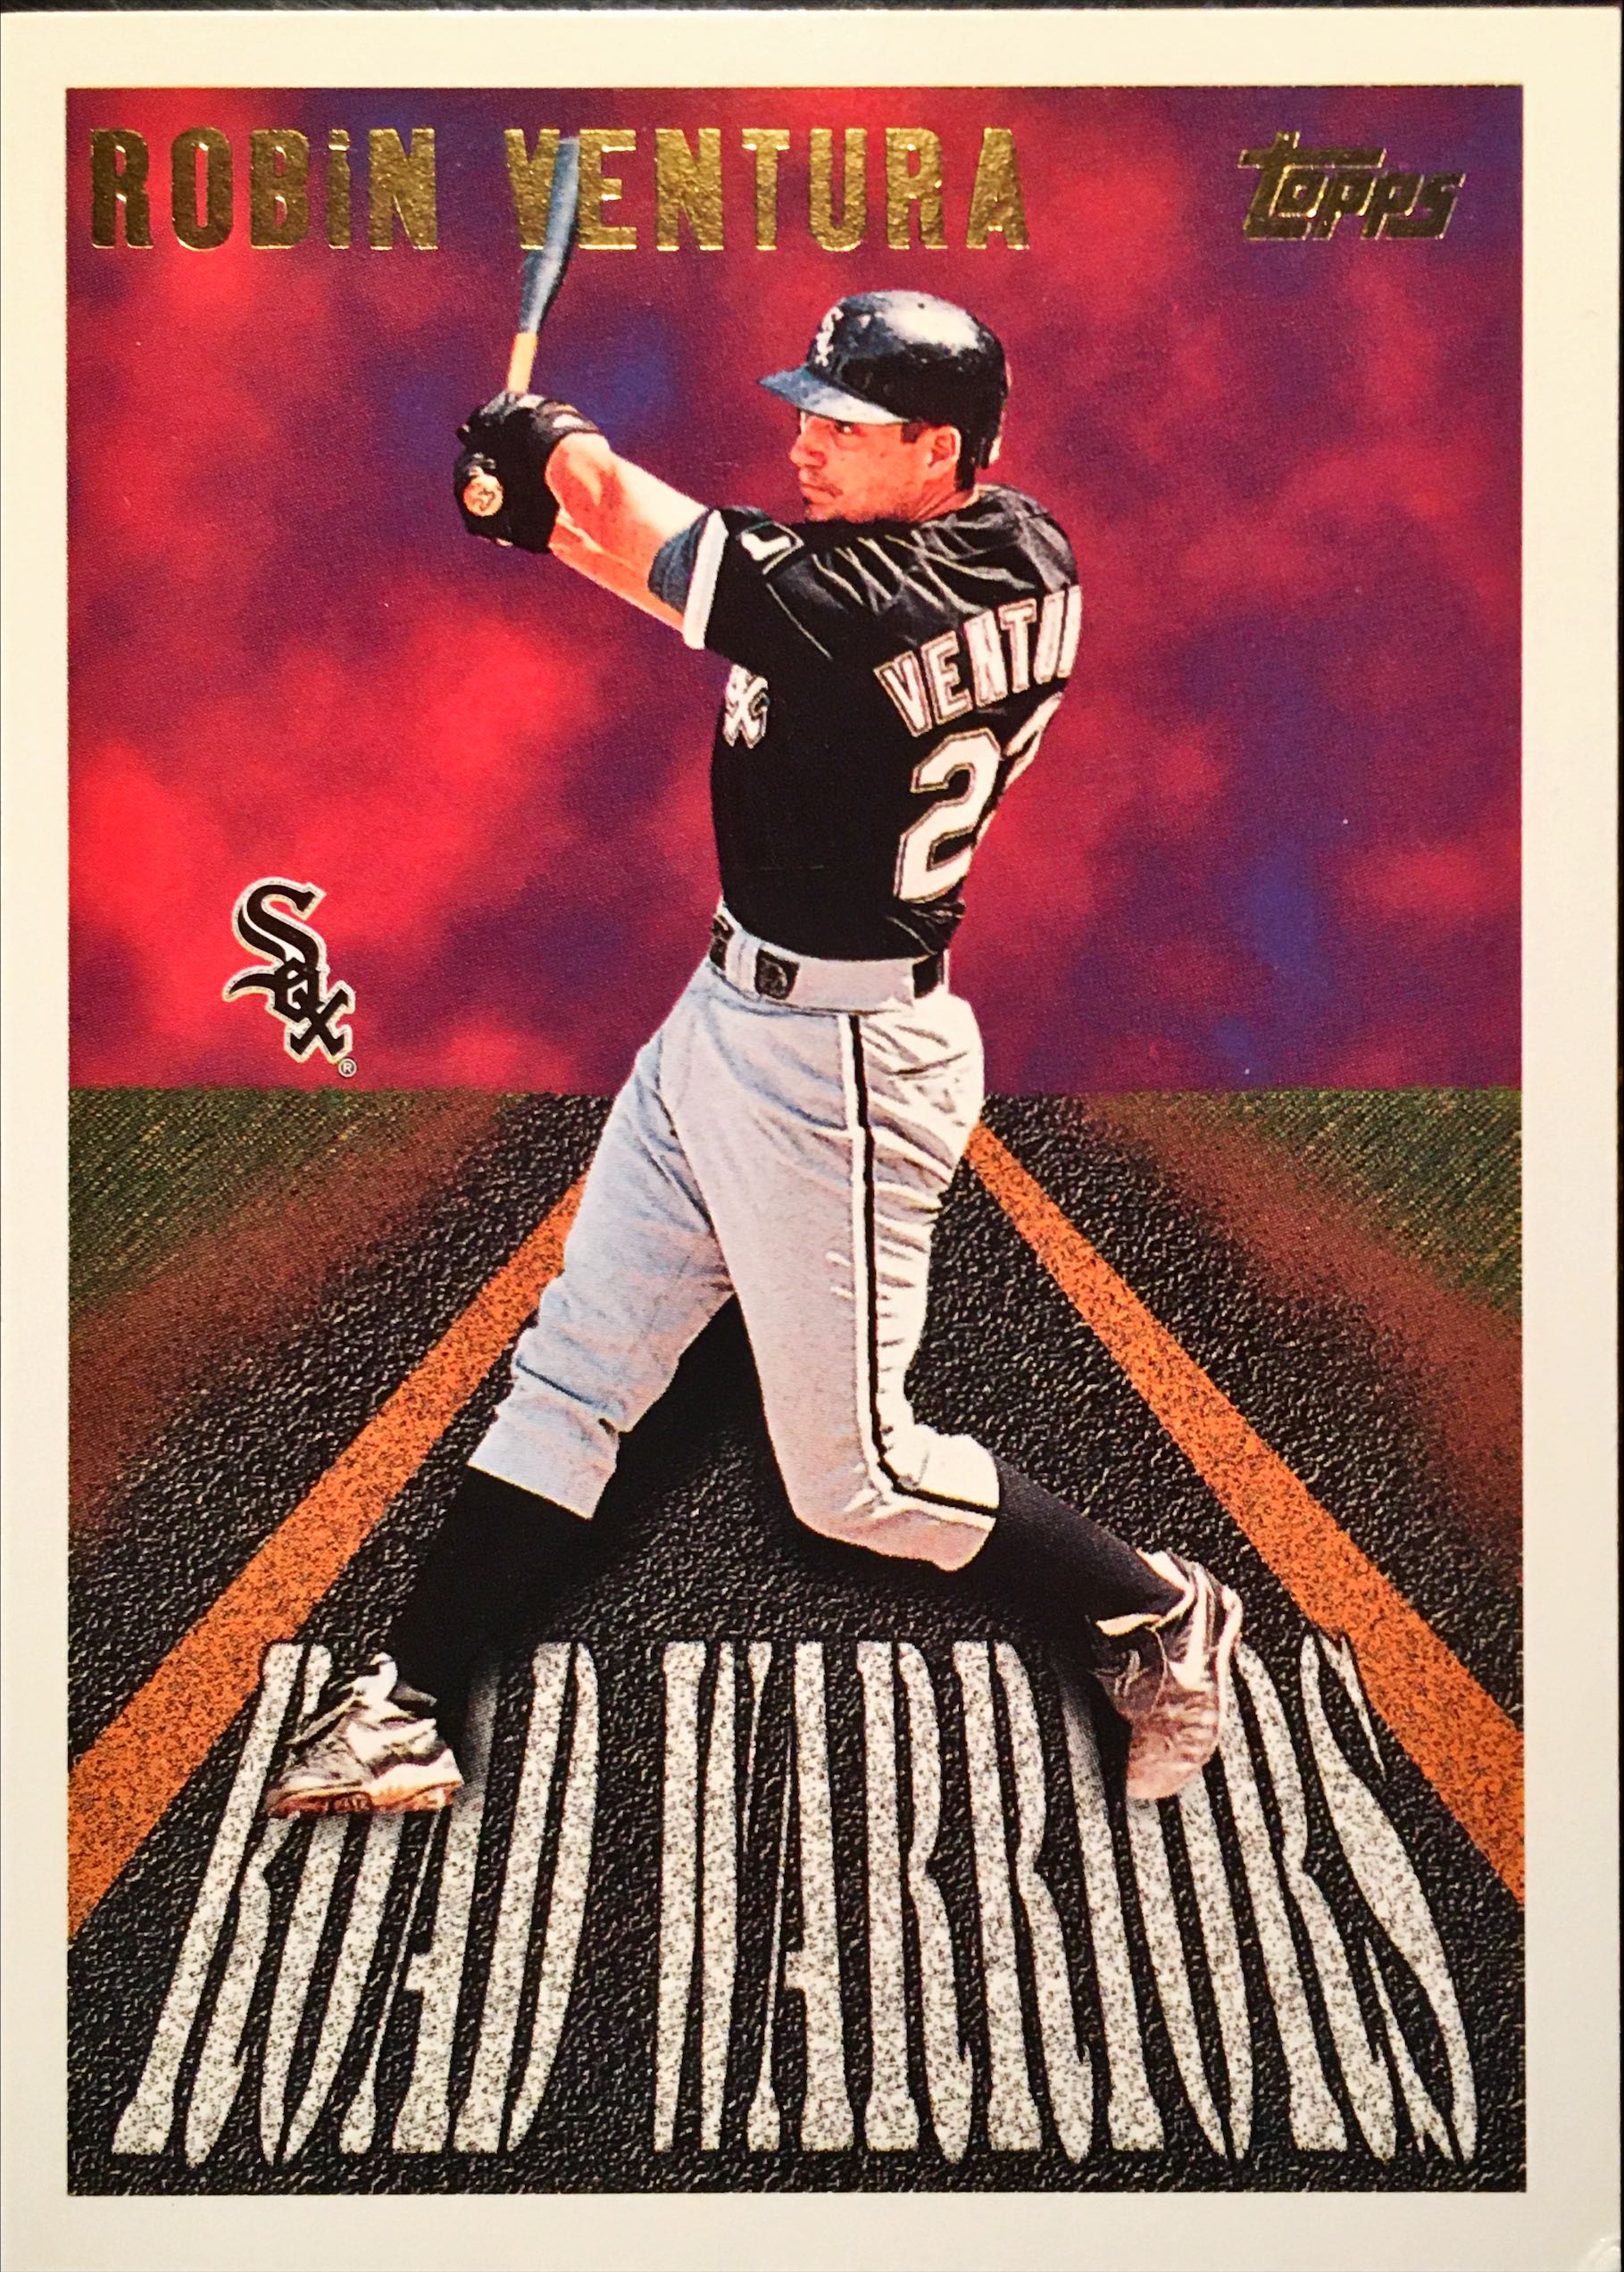 1996 Topps Road Warriors RW19 front image